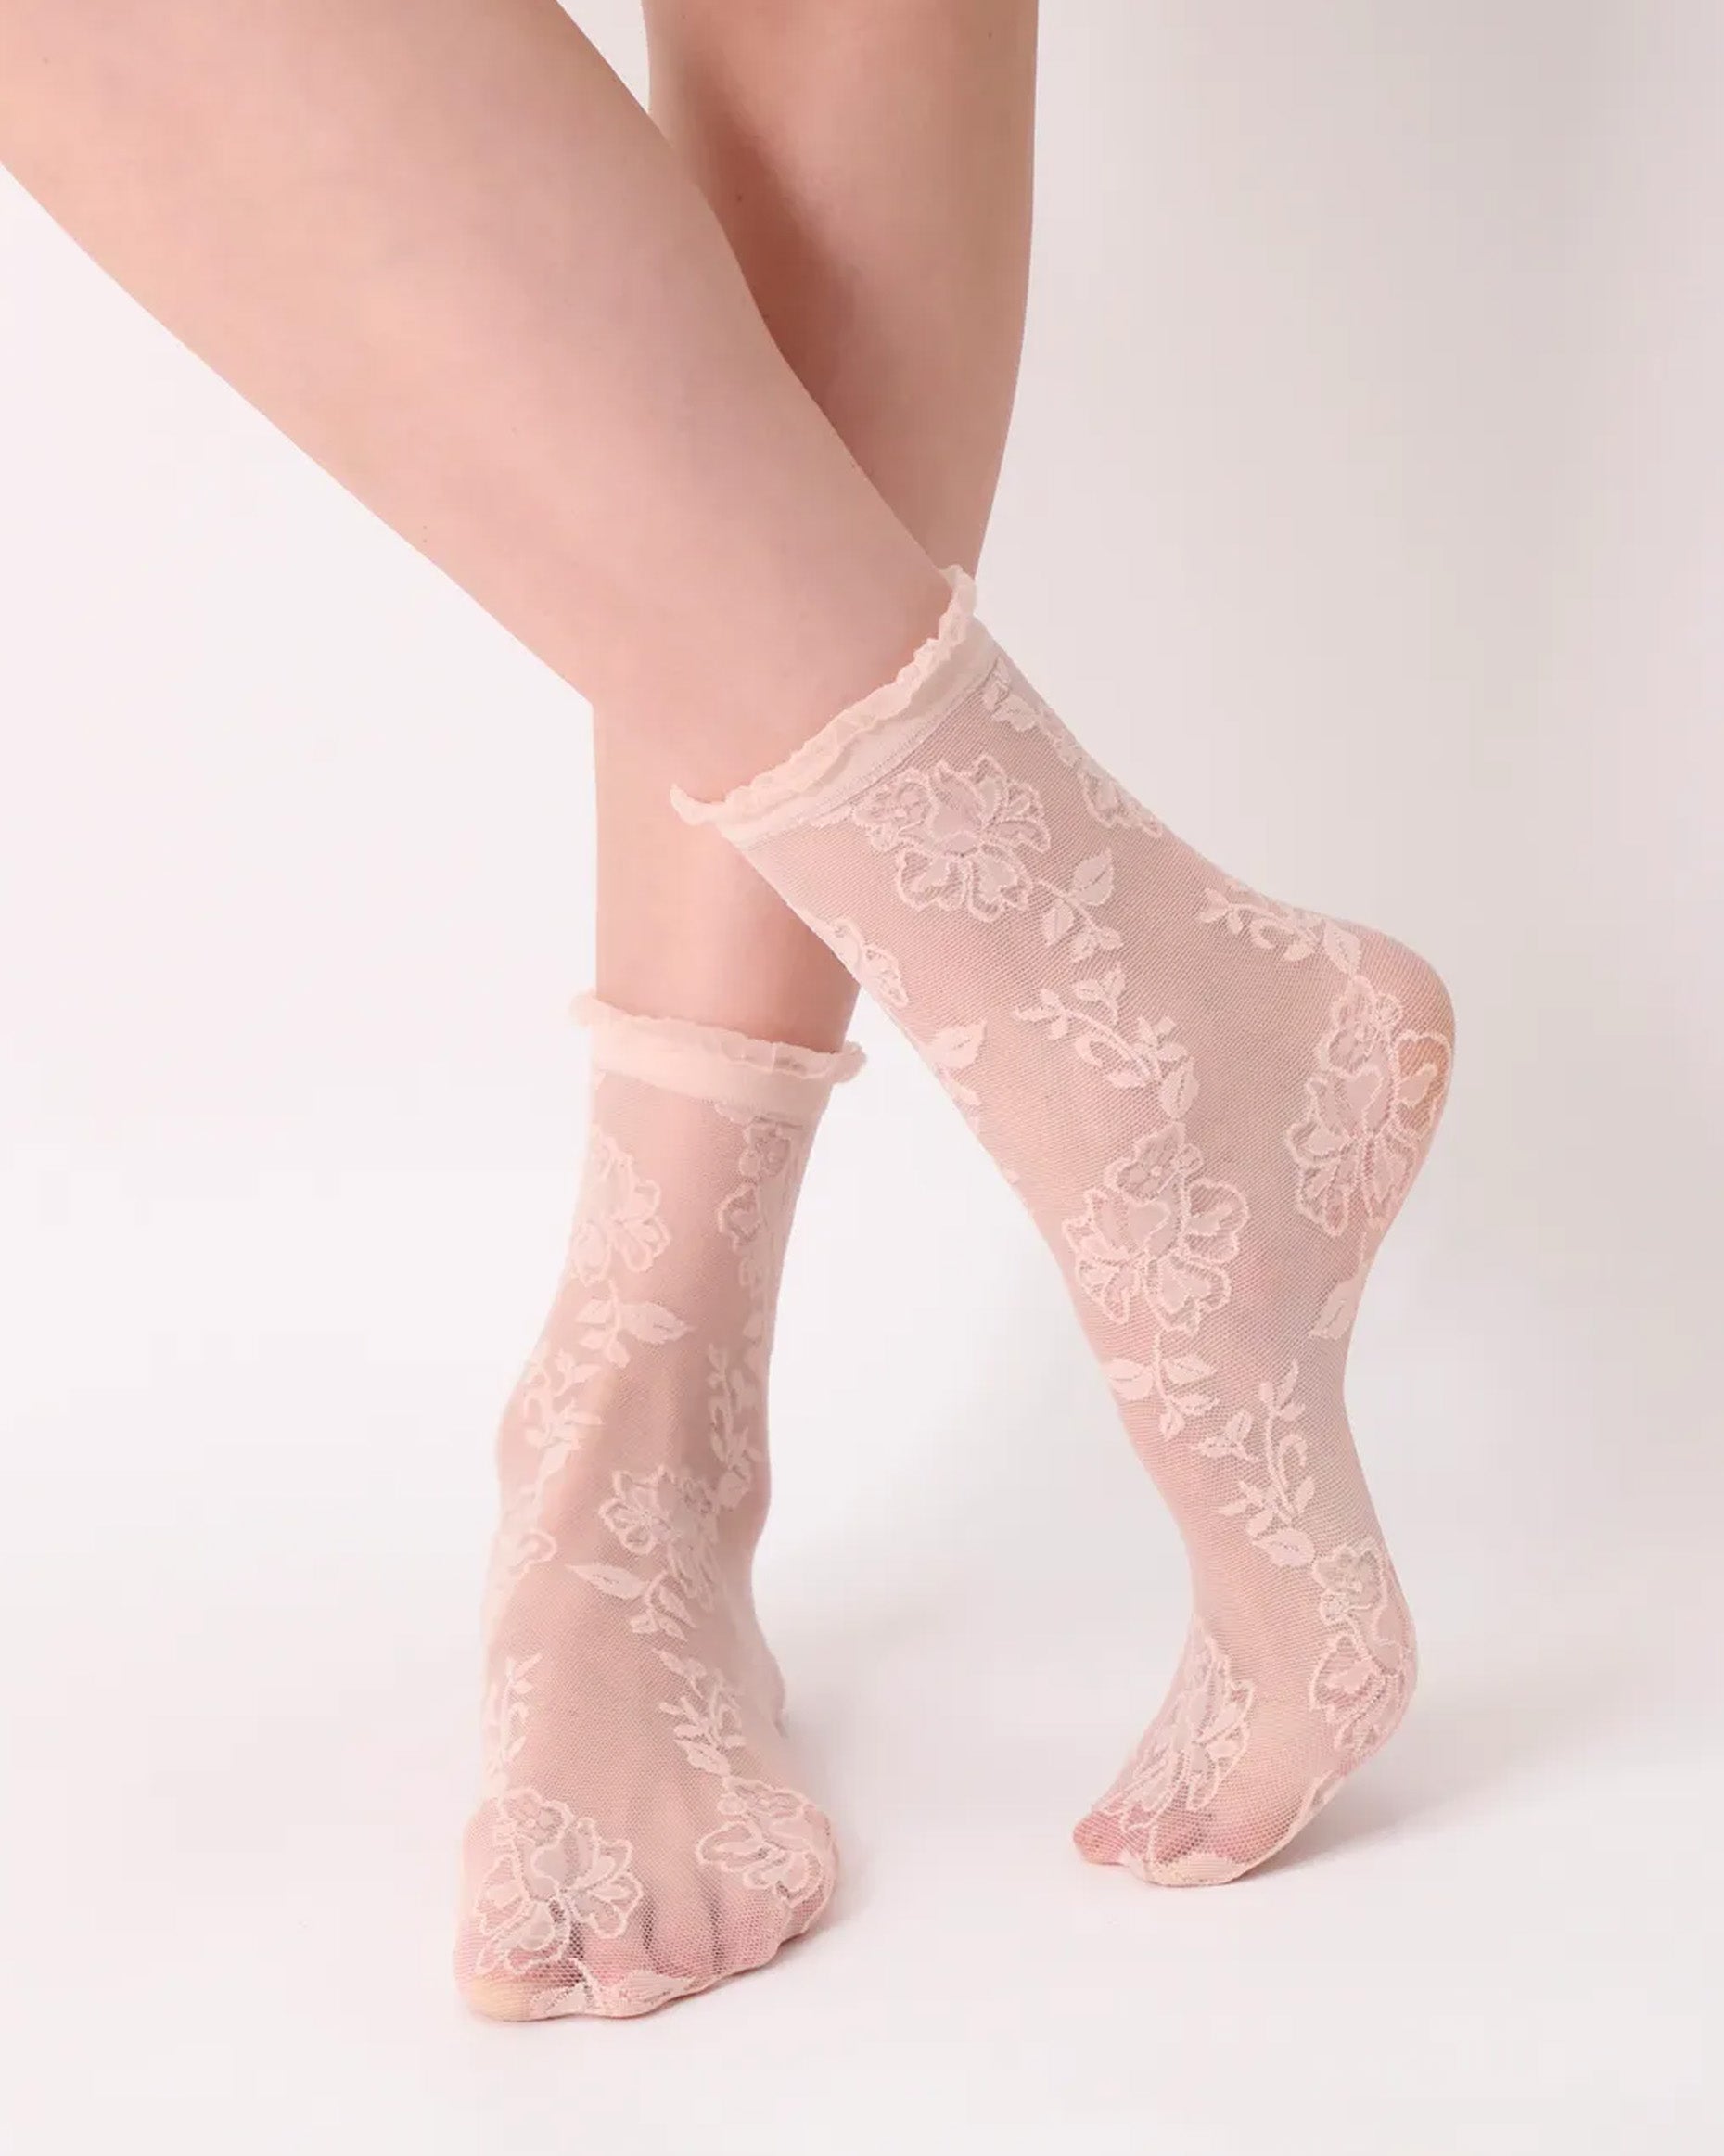 Oroblù Trim Calzino - Sheer light nude micro mesh fashion ankle socks with a woven floral lace style pattern and frill cuff edge.